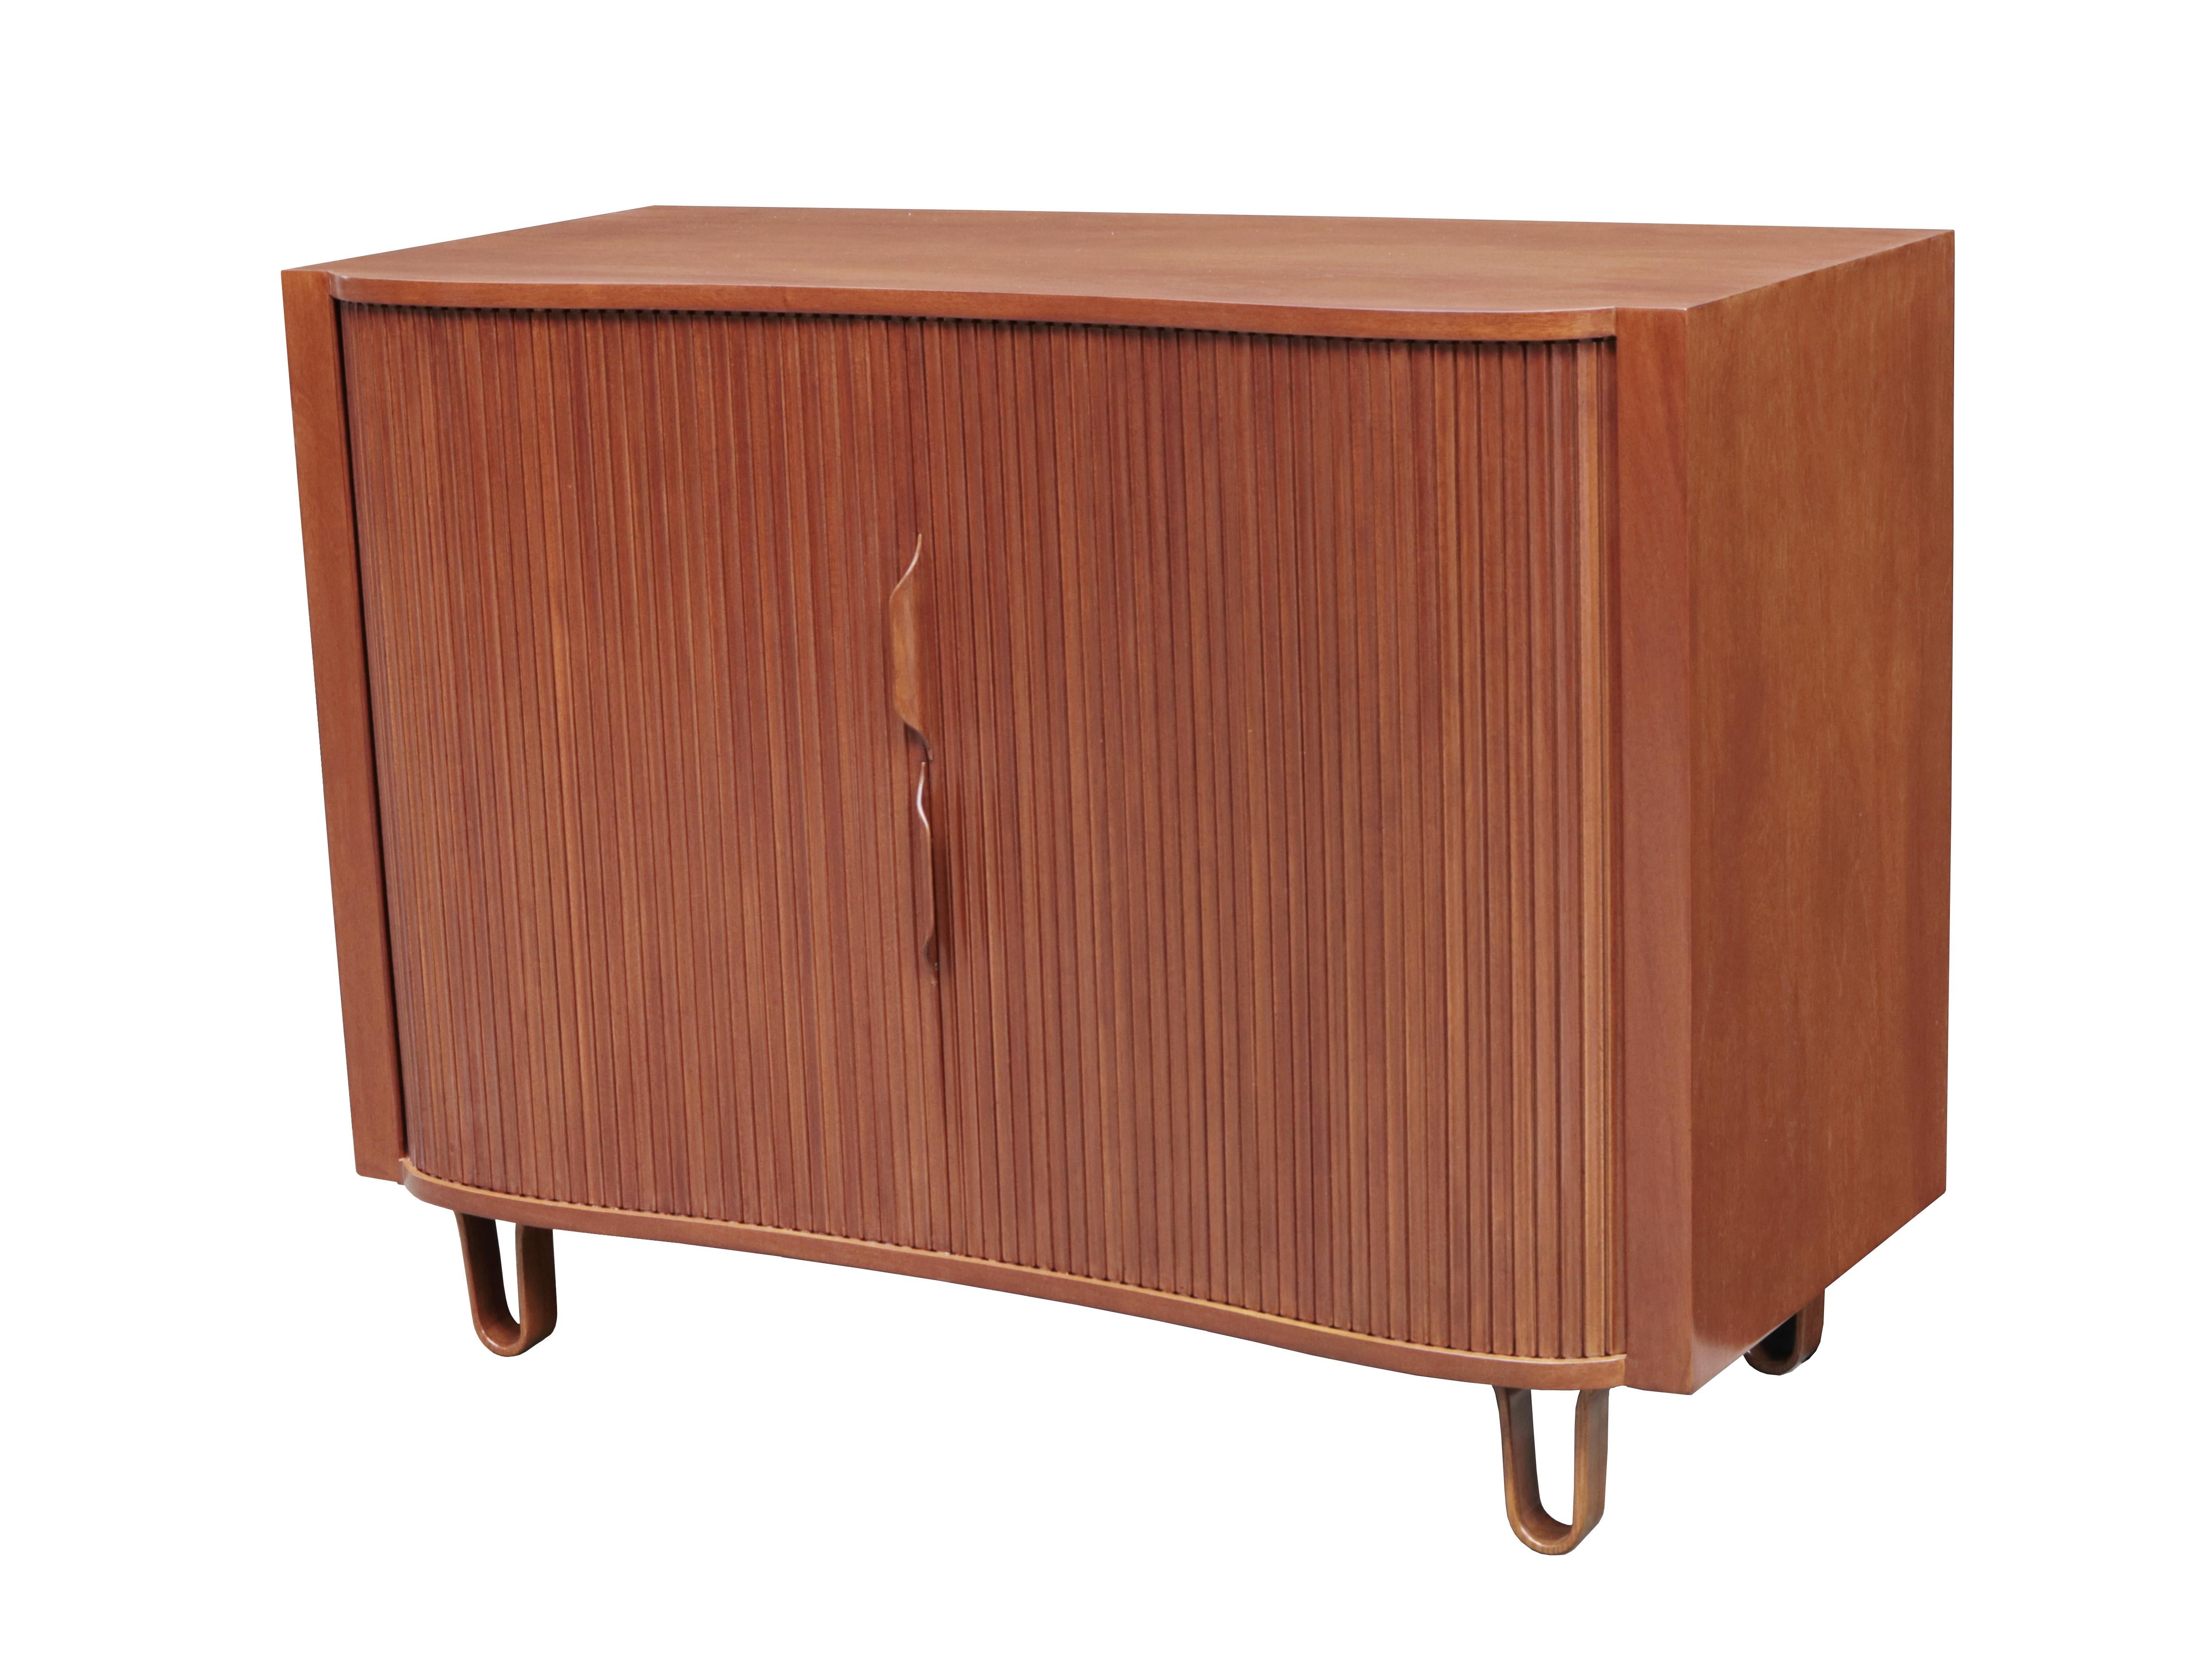 Mahogany with curved tambour doors with sixteen interior drawers in two banks, resting on hairpin legs.